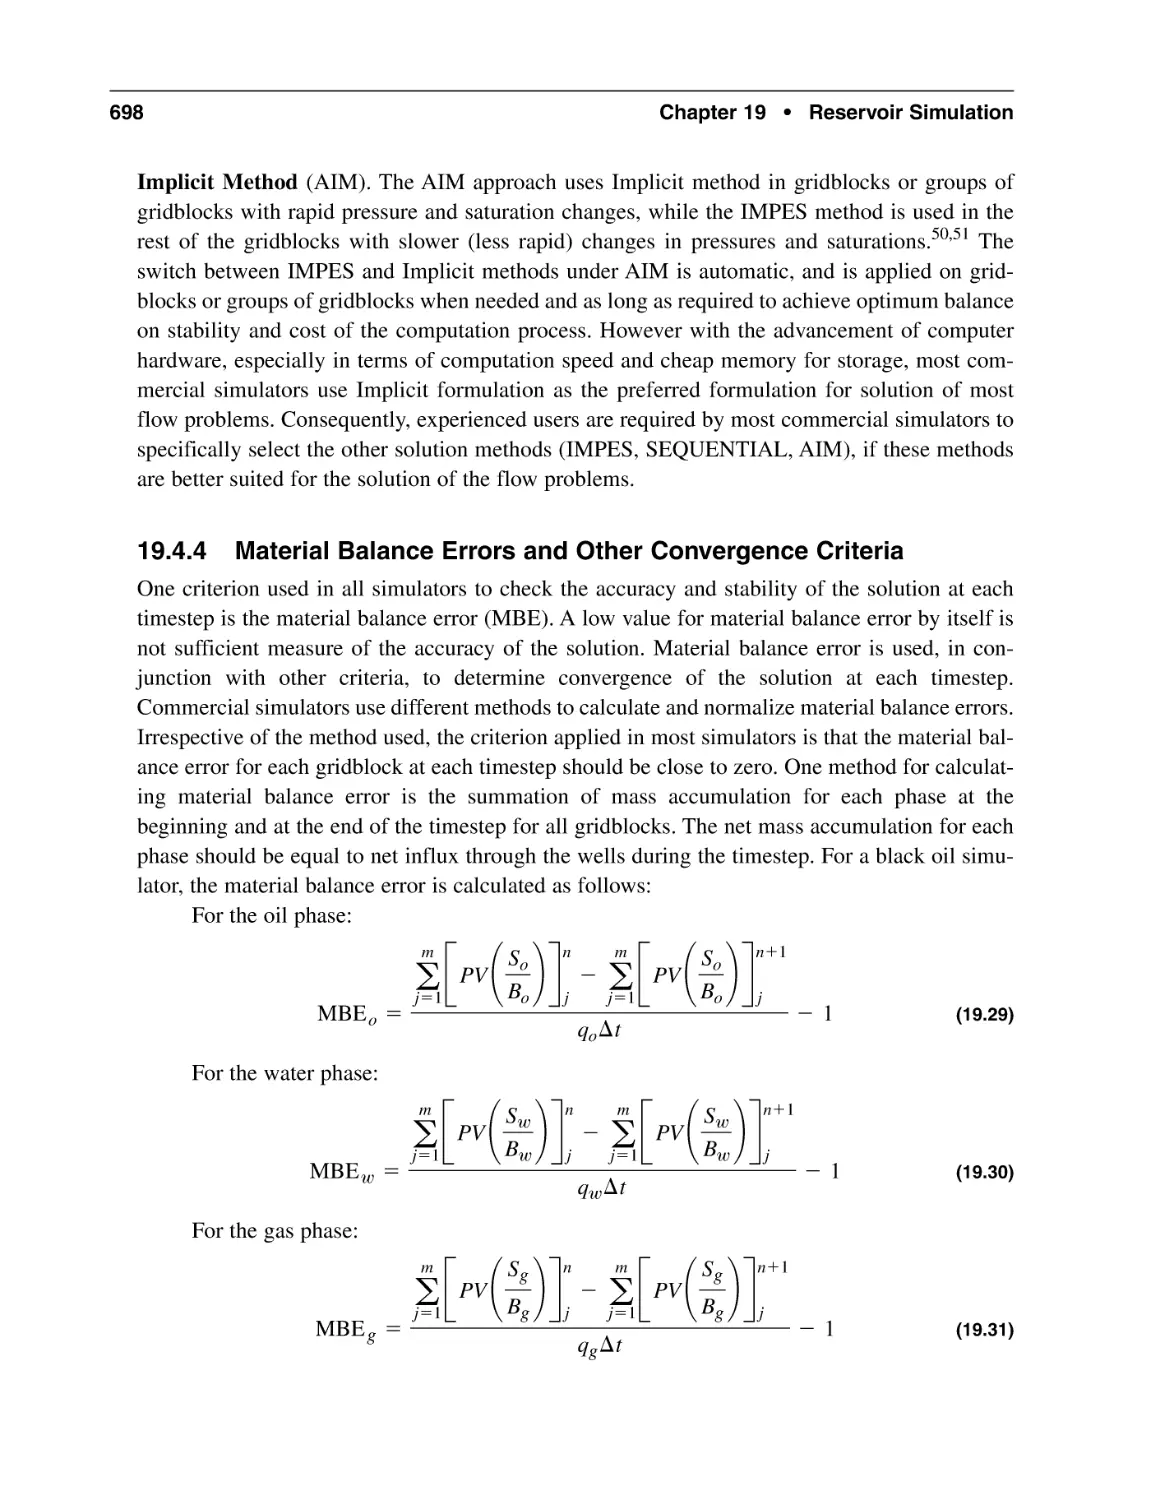 19.4.4 Material Balance Errors and Other Convergence Criteria